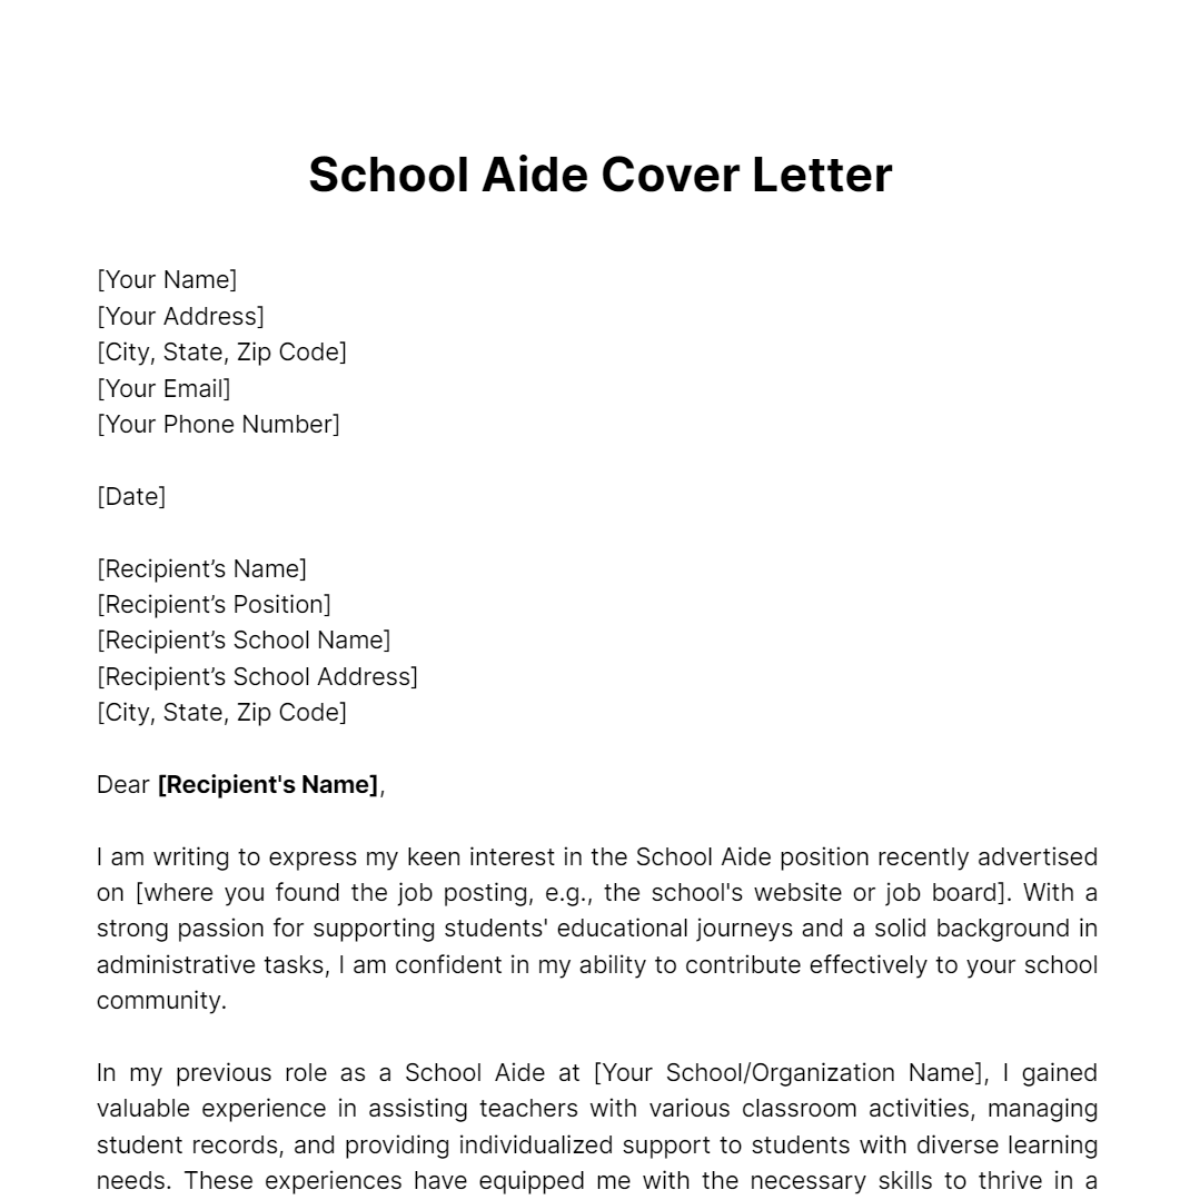 sample cover letter for school aide position